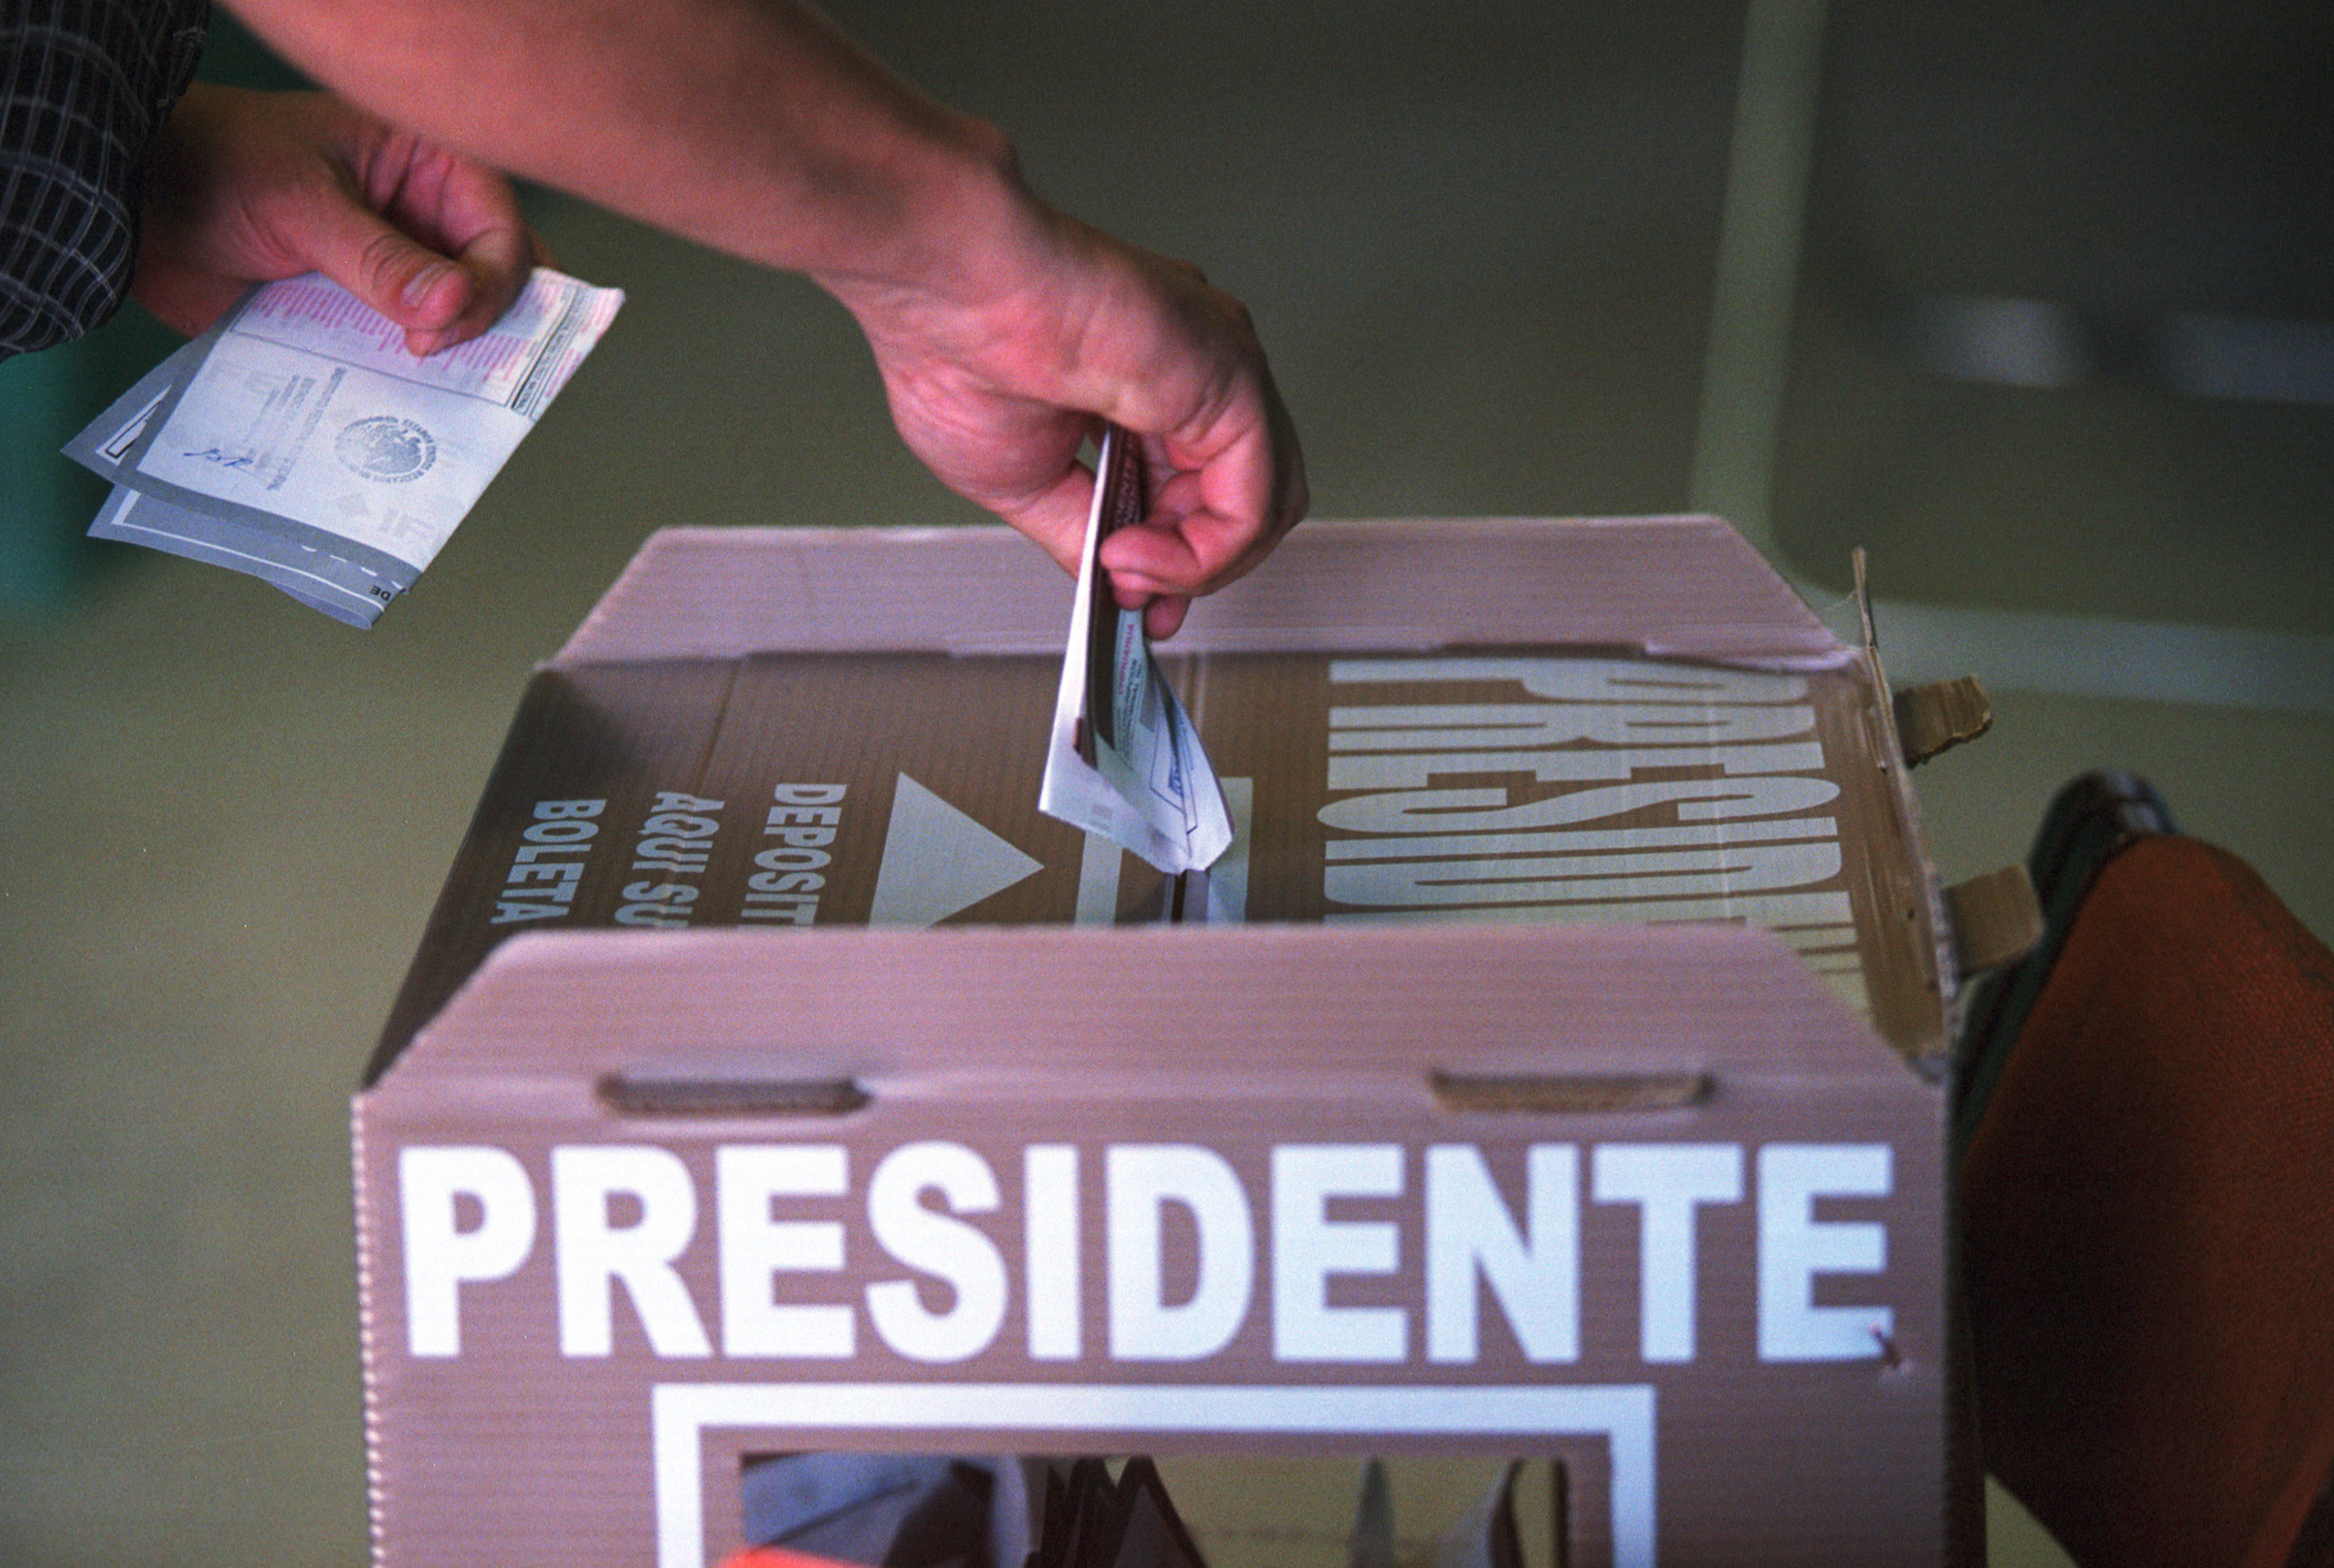 A citizen casts his vote in the Mexican presidential election July 2, 2000, in Ciudad Juarez, Mexico. (Joe Raedle—Getty Images)